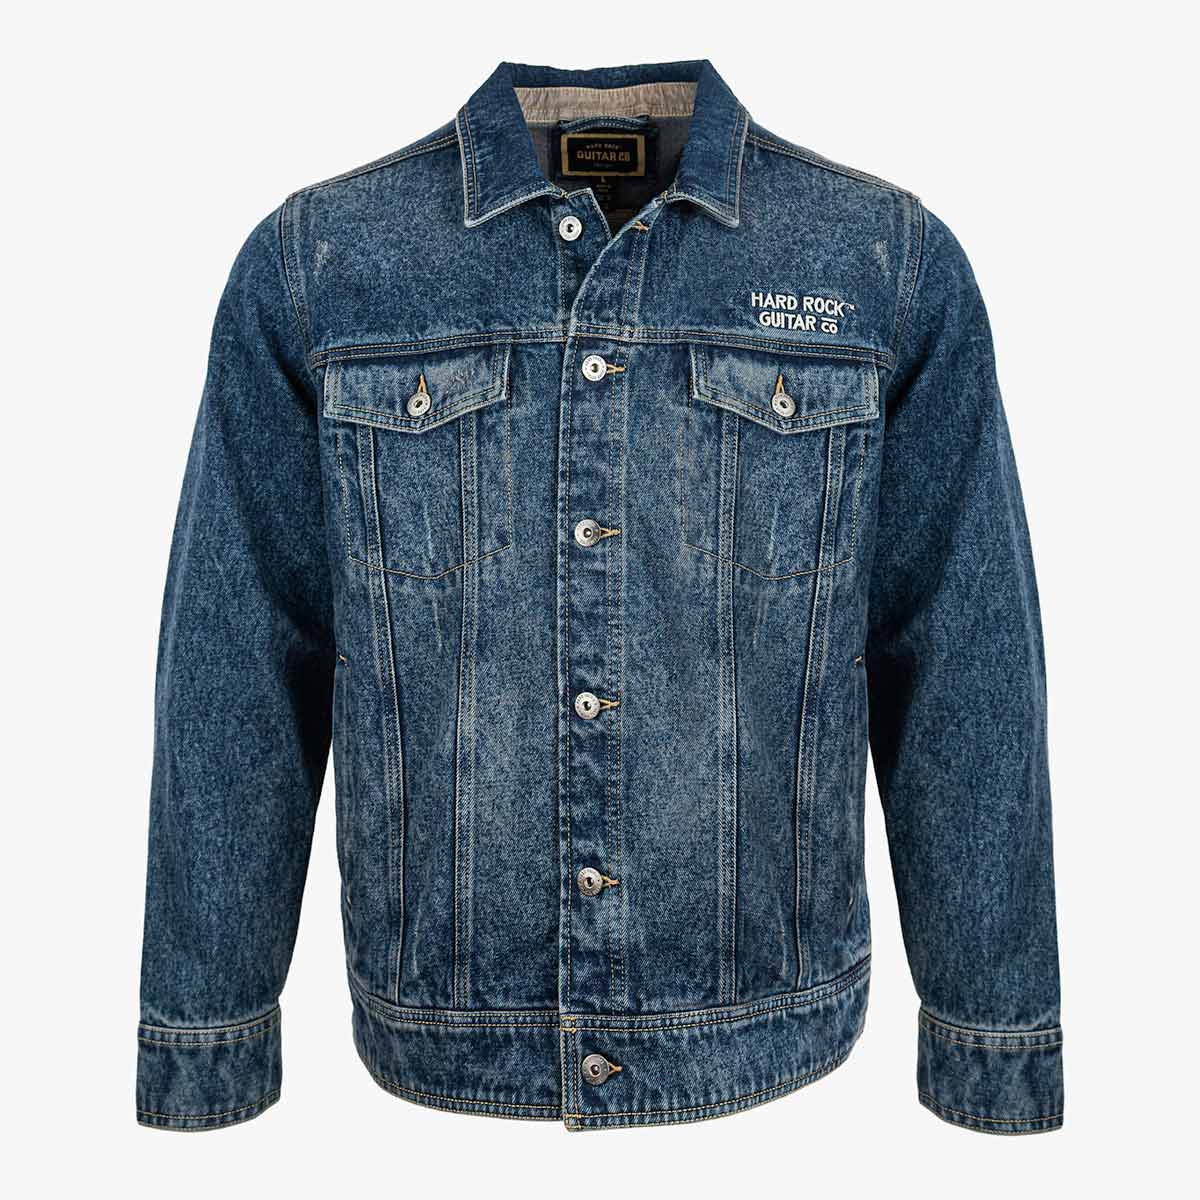 Guitar Company Denim Jacket with Cross Skull Roses image number 2